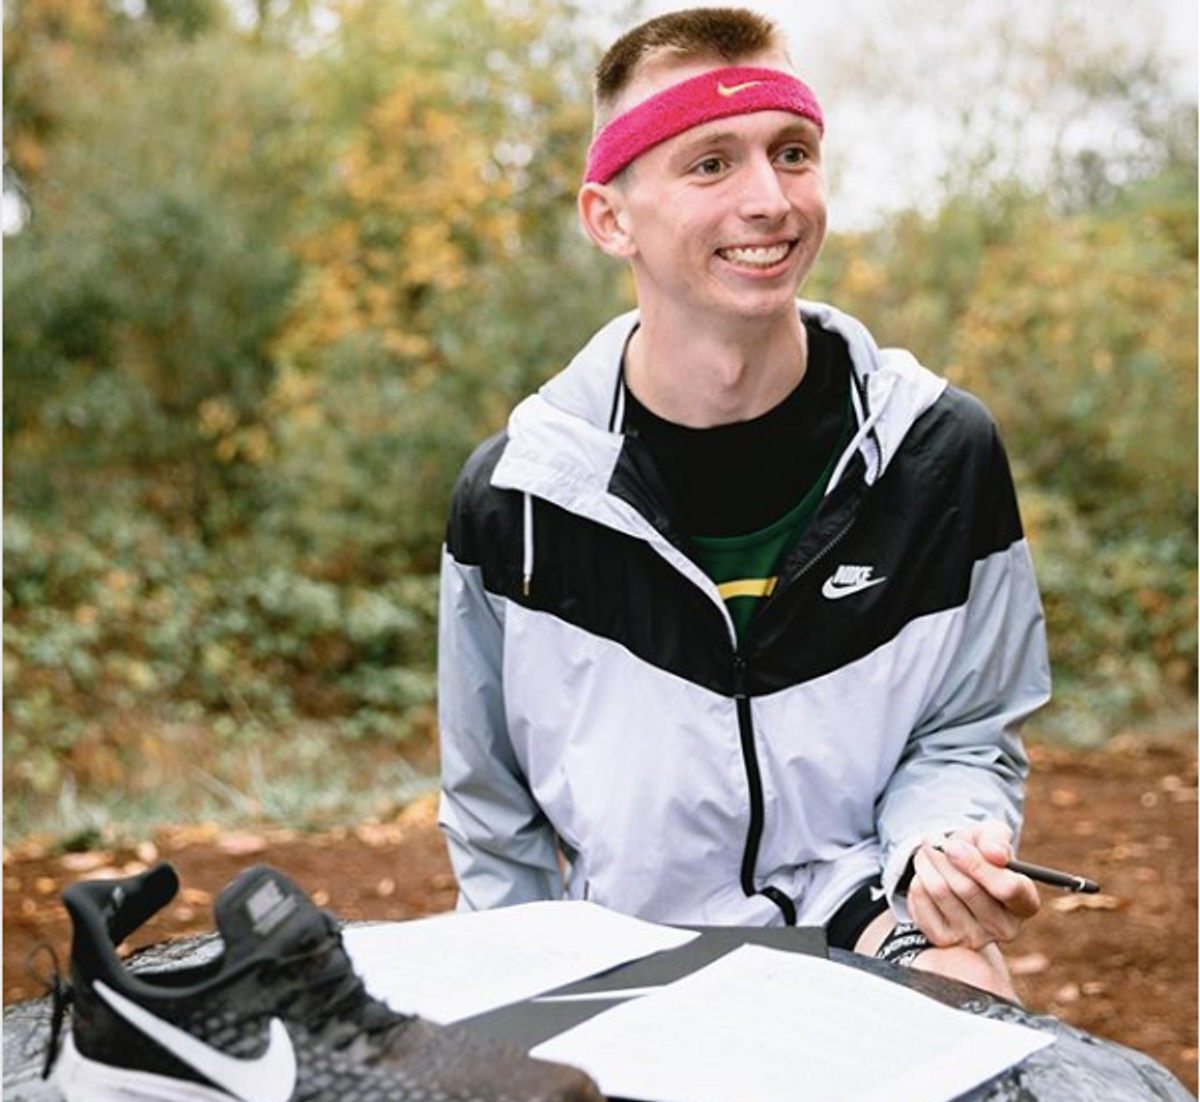 Nike pushes inclusive agenda with disability sponsorship